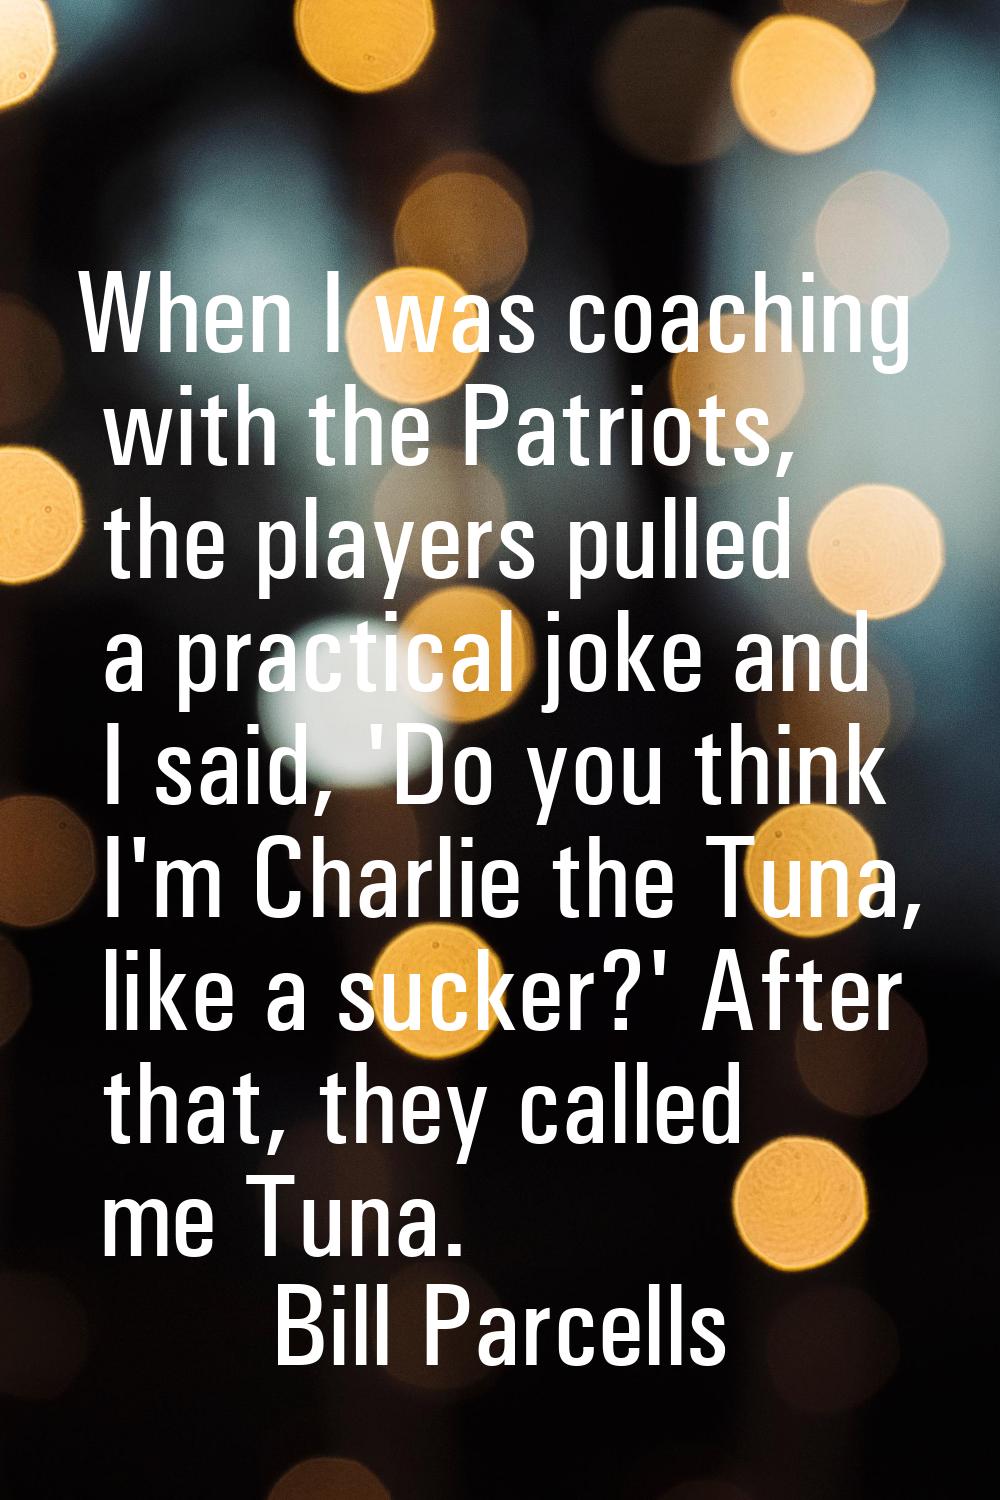 When I was coaching with the Patriots, the players pulled a practical joke and I said, 'Do you thin